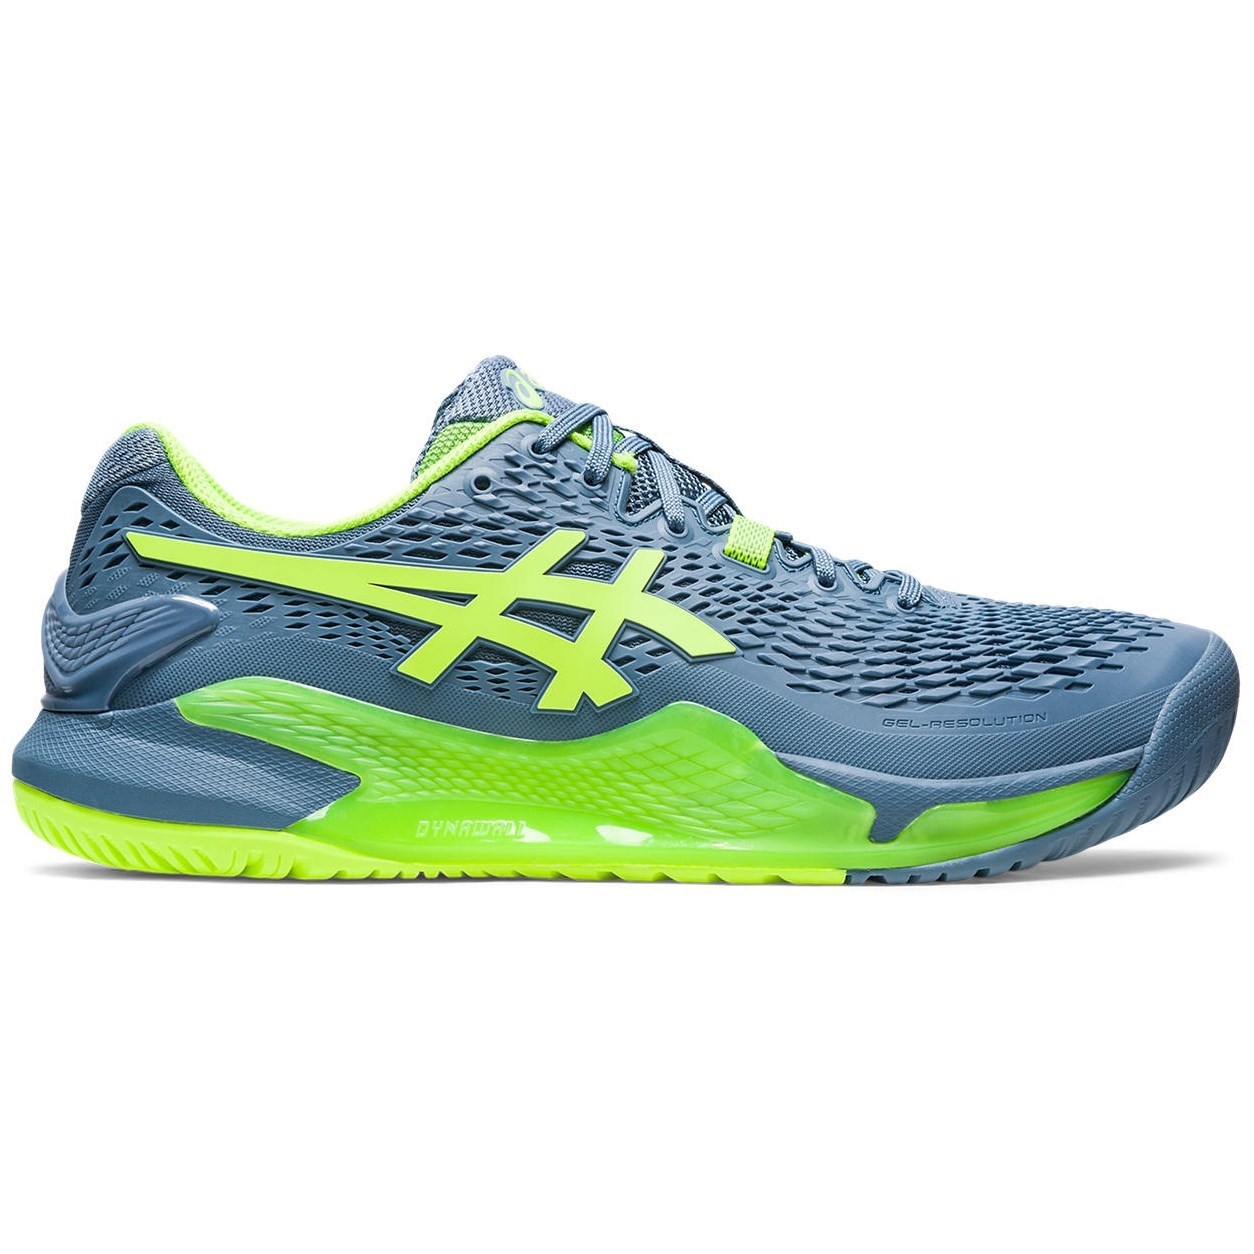 Asics Gel-Resolution Limited Edition Men's Tennis Shoes,, 51% OFF